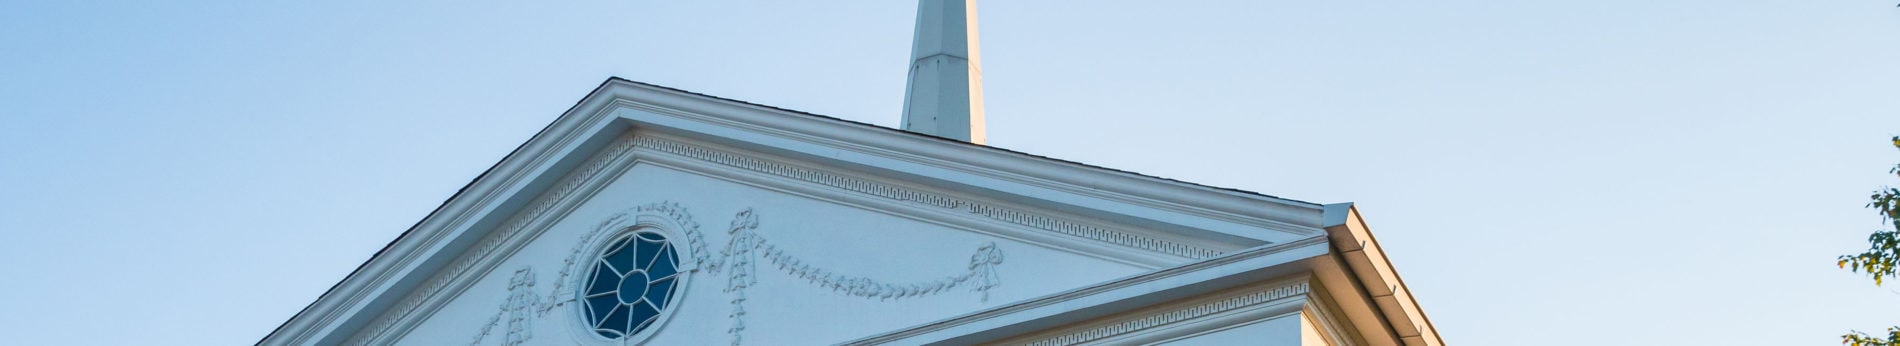 Exterior detail shot of Catonsville Presbyterian Church, showing roofline, decorative window, and steeple.